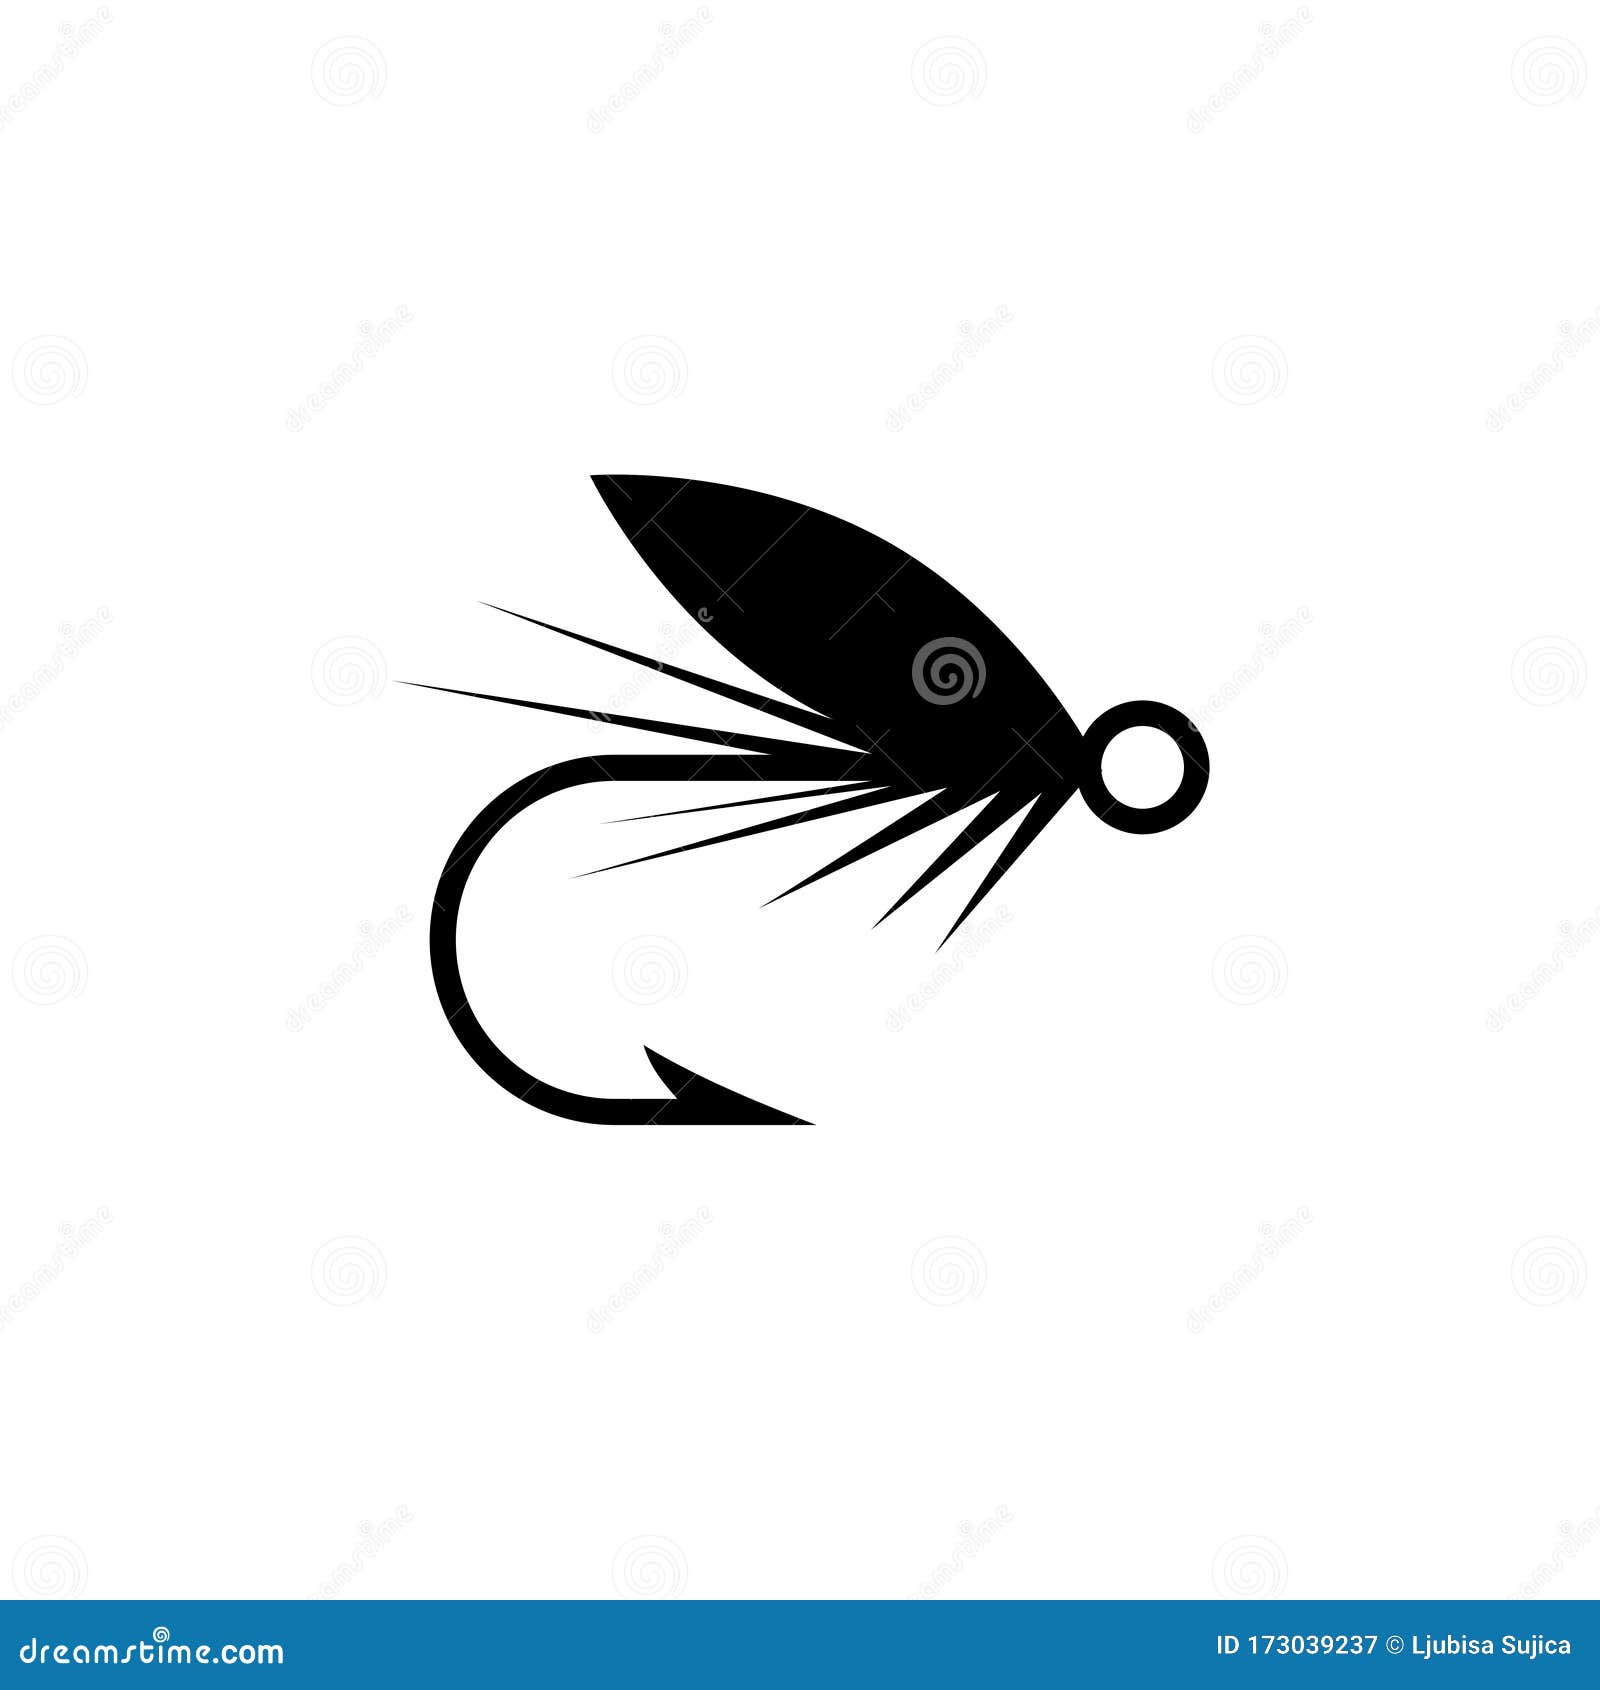 https://thumbs.dreamstime.com/z/fishing-hook-feather-icon-graphic-fly-fishing-icon-logo-fishing-hook-feather-icon-graphic-fly-fishing-icon-logo-173039237.jpg